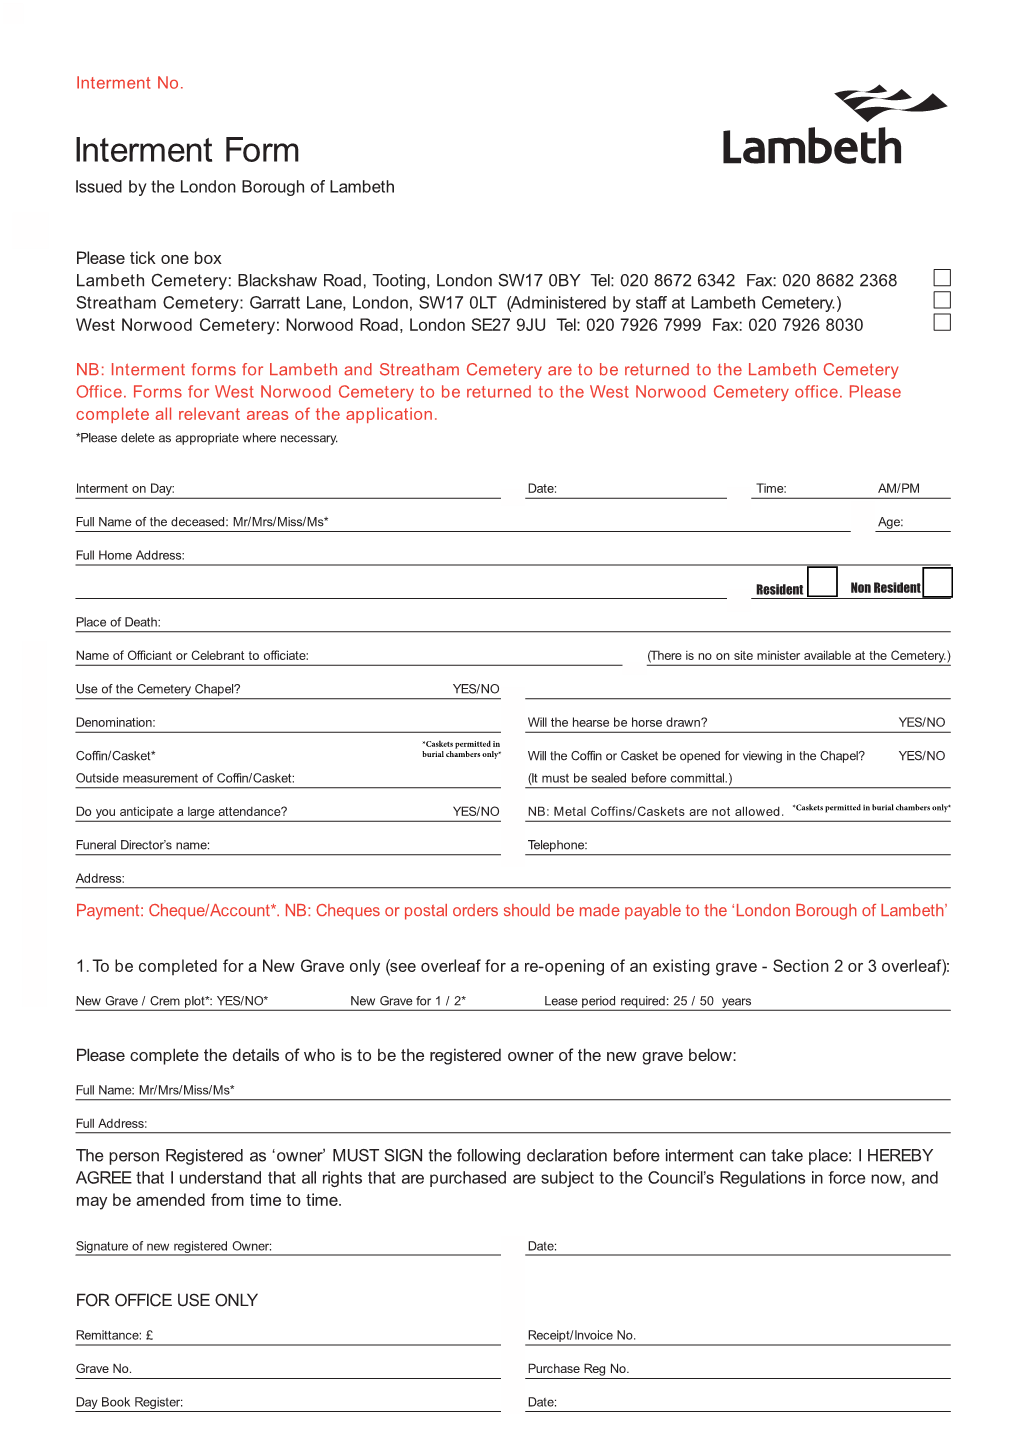 Interment Form Issued by the London Borough of Lambeth